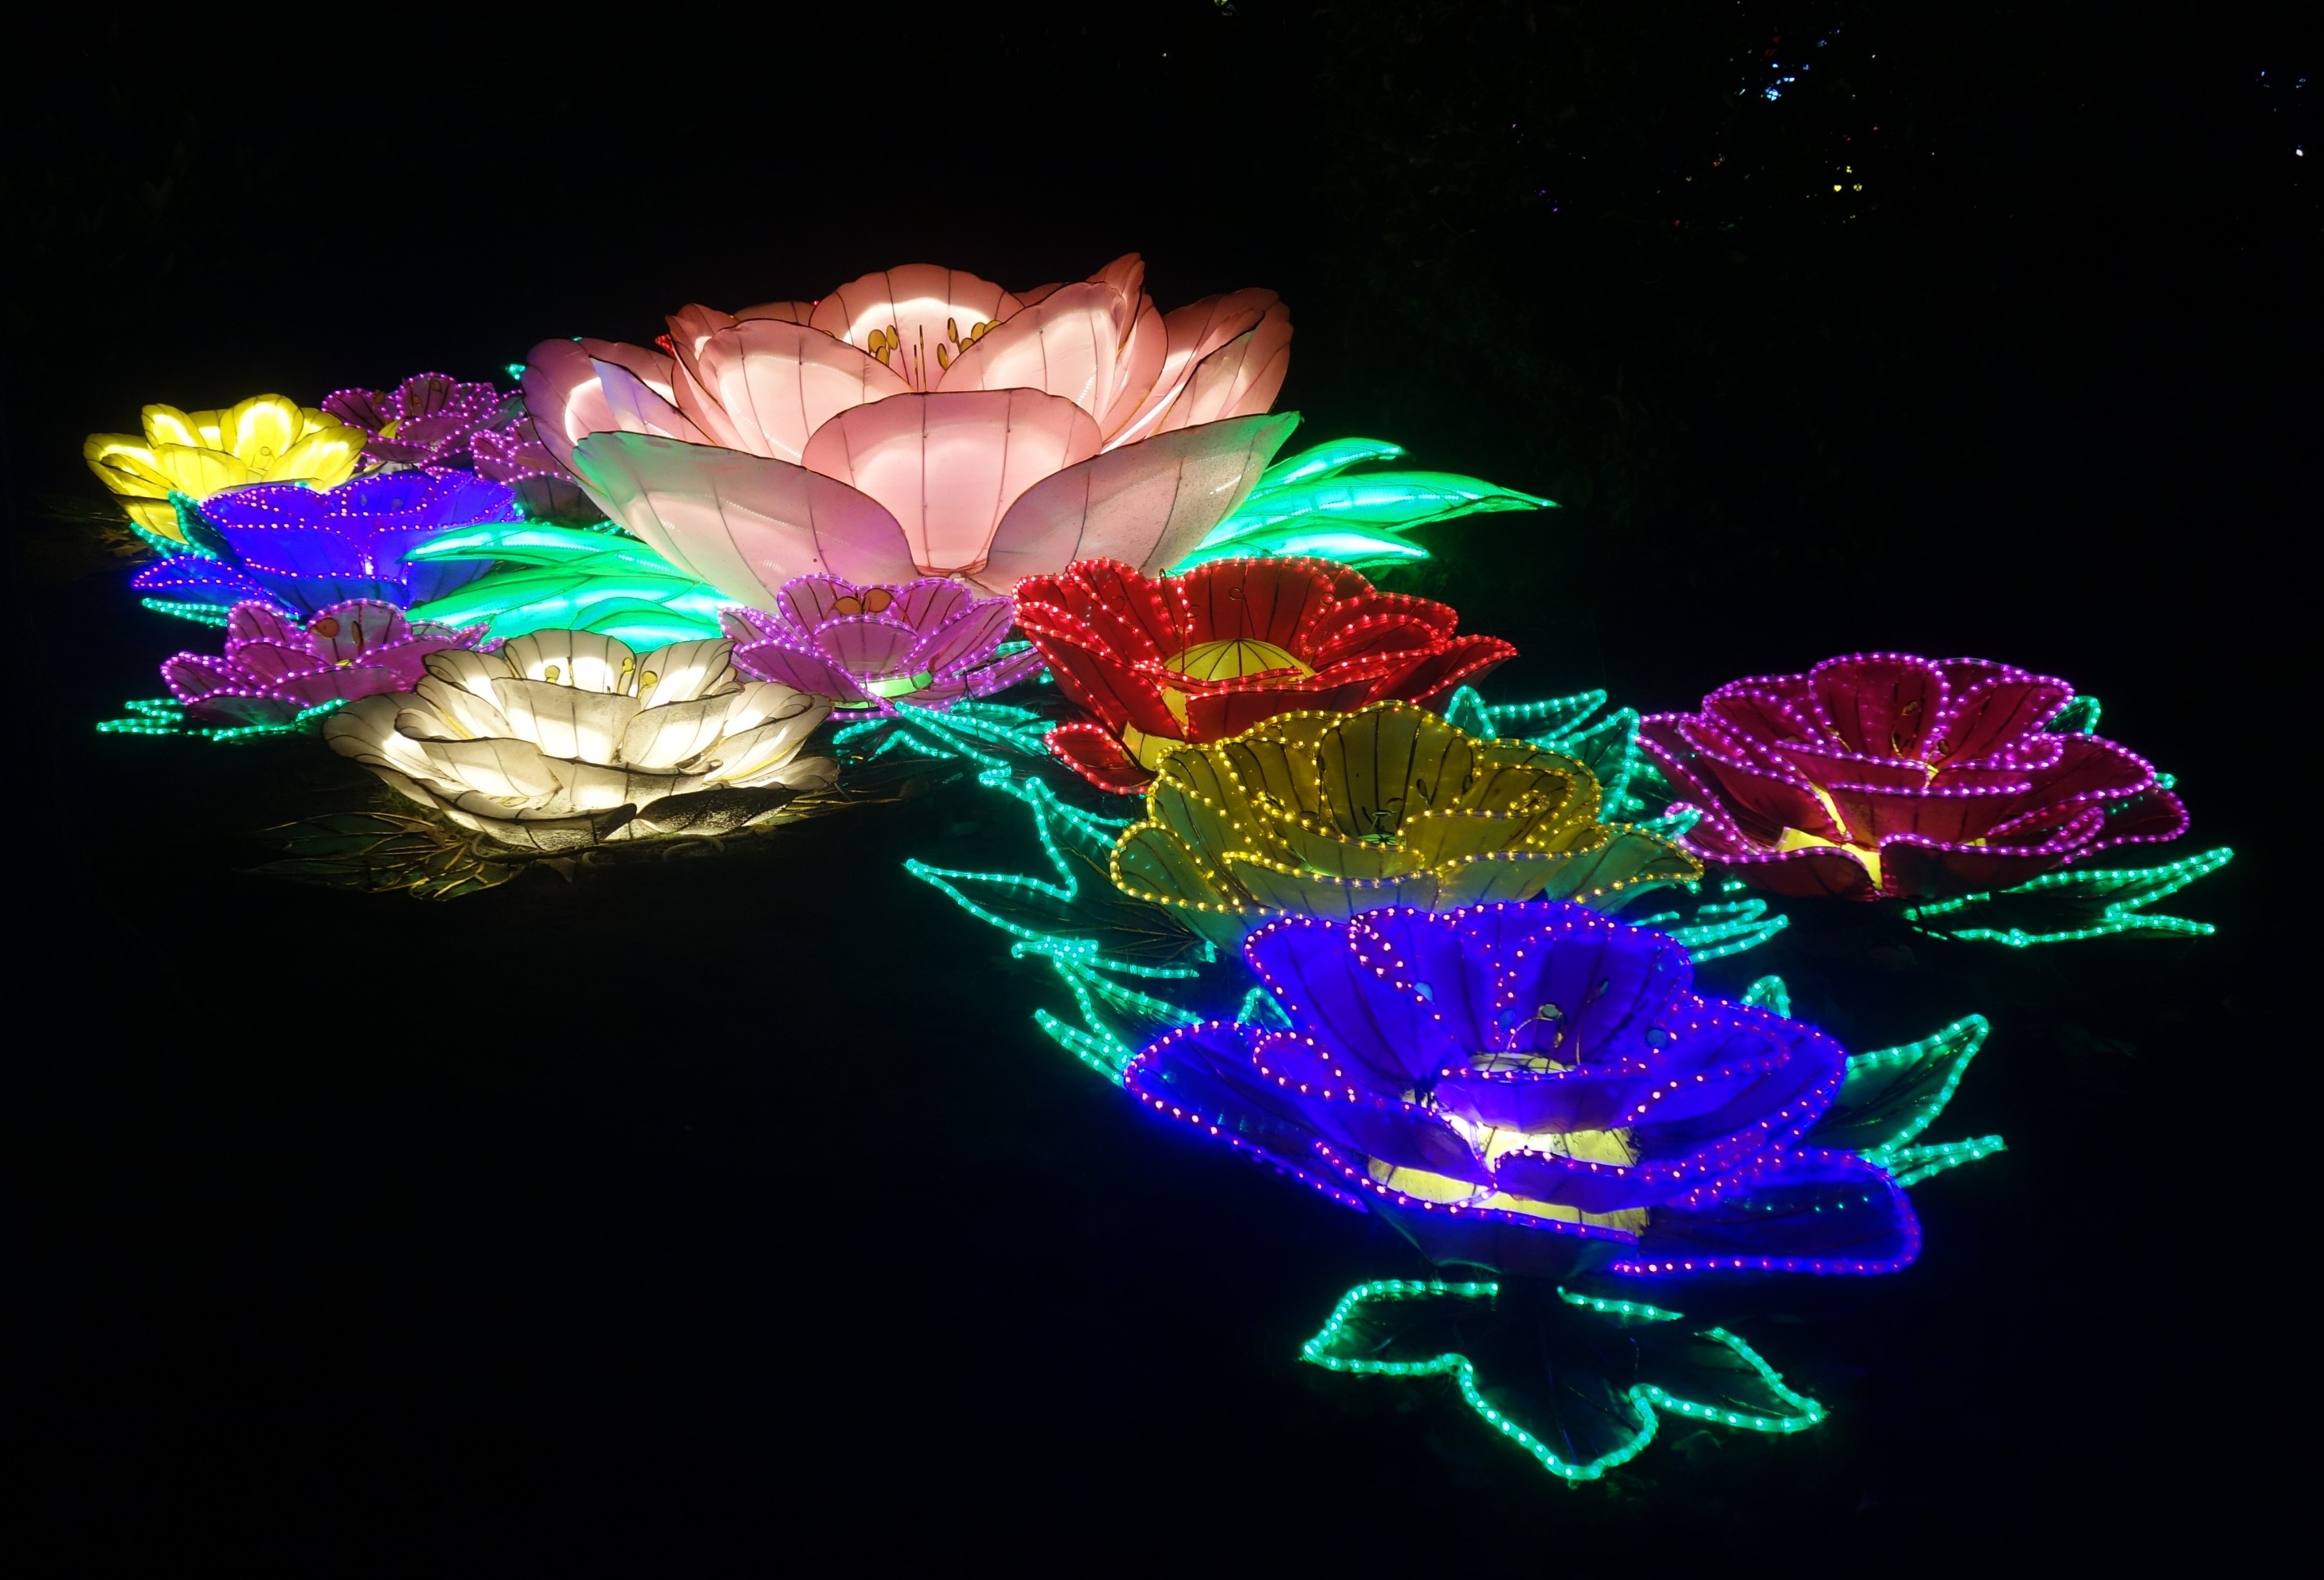 "China Light" in the Antwerp Zoo.
A Chinese love story depicted with light-artworks.  #TroveOnTuesday  #Colorful  #Culture